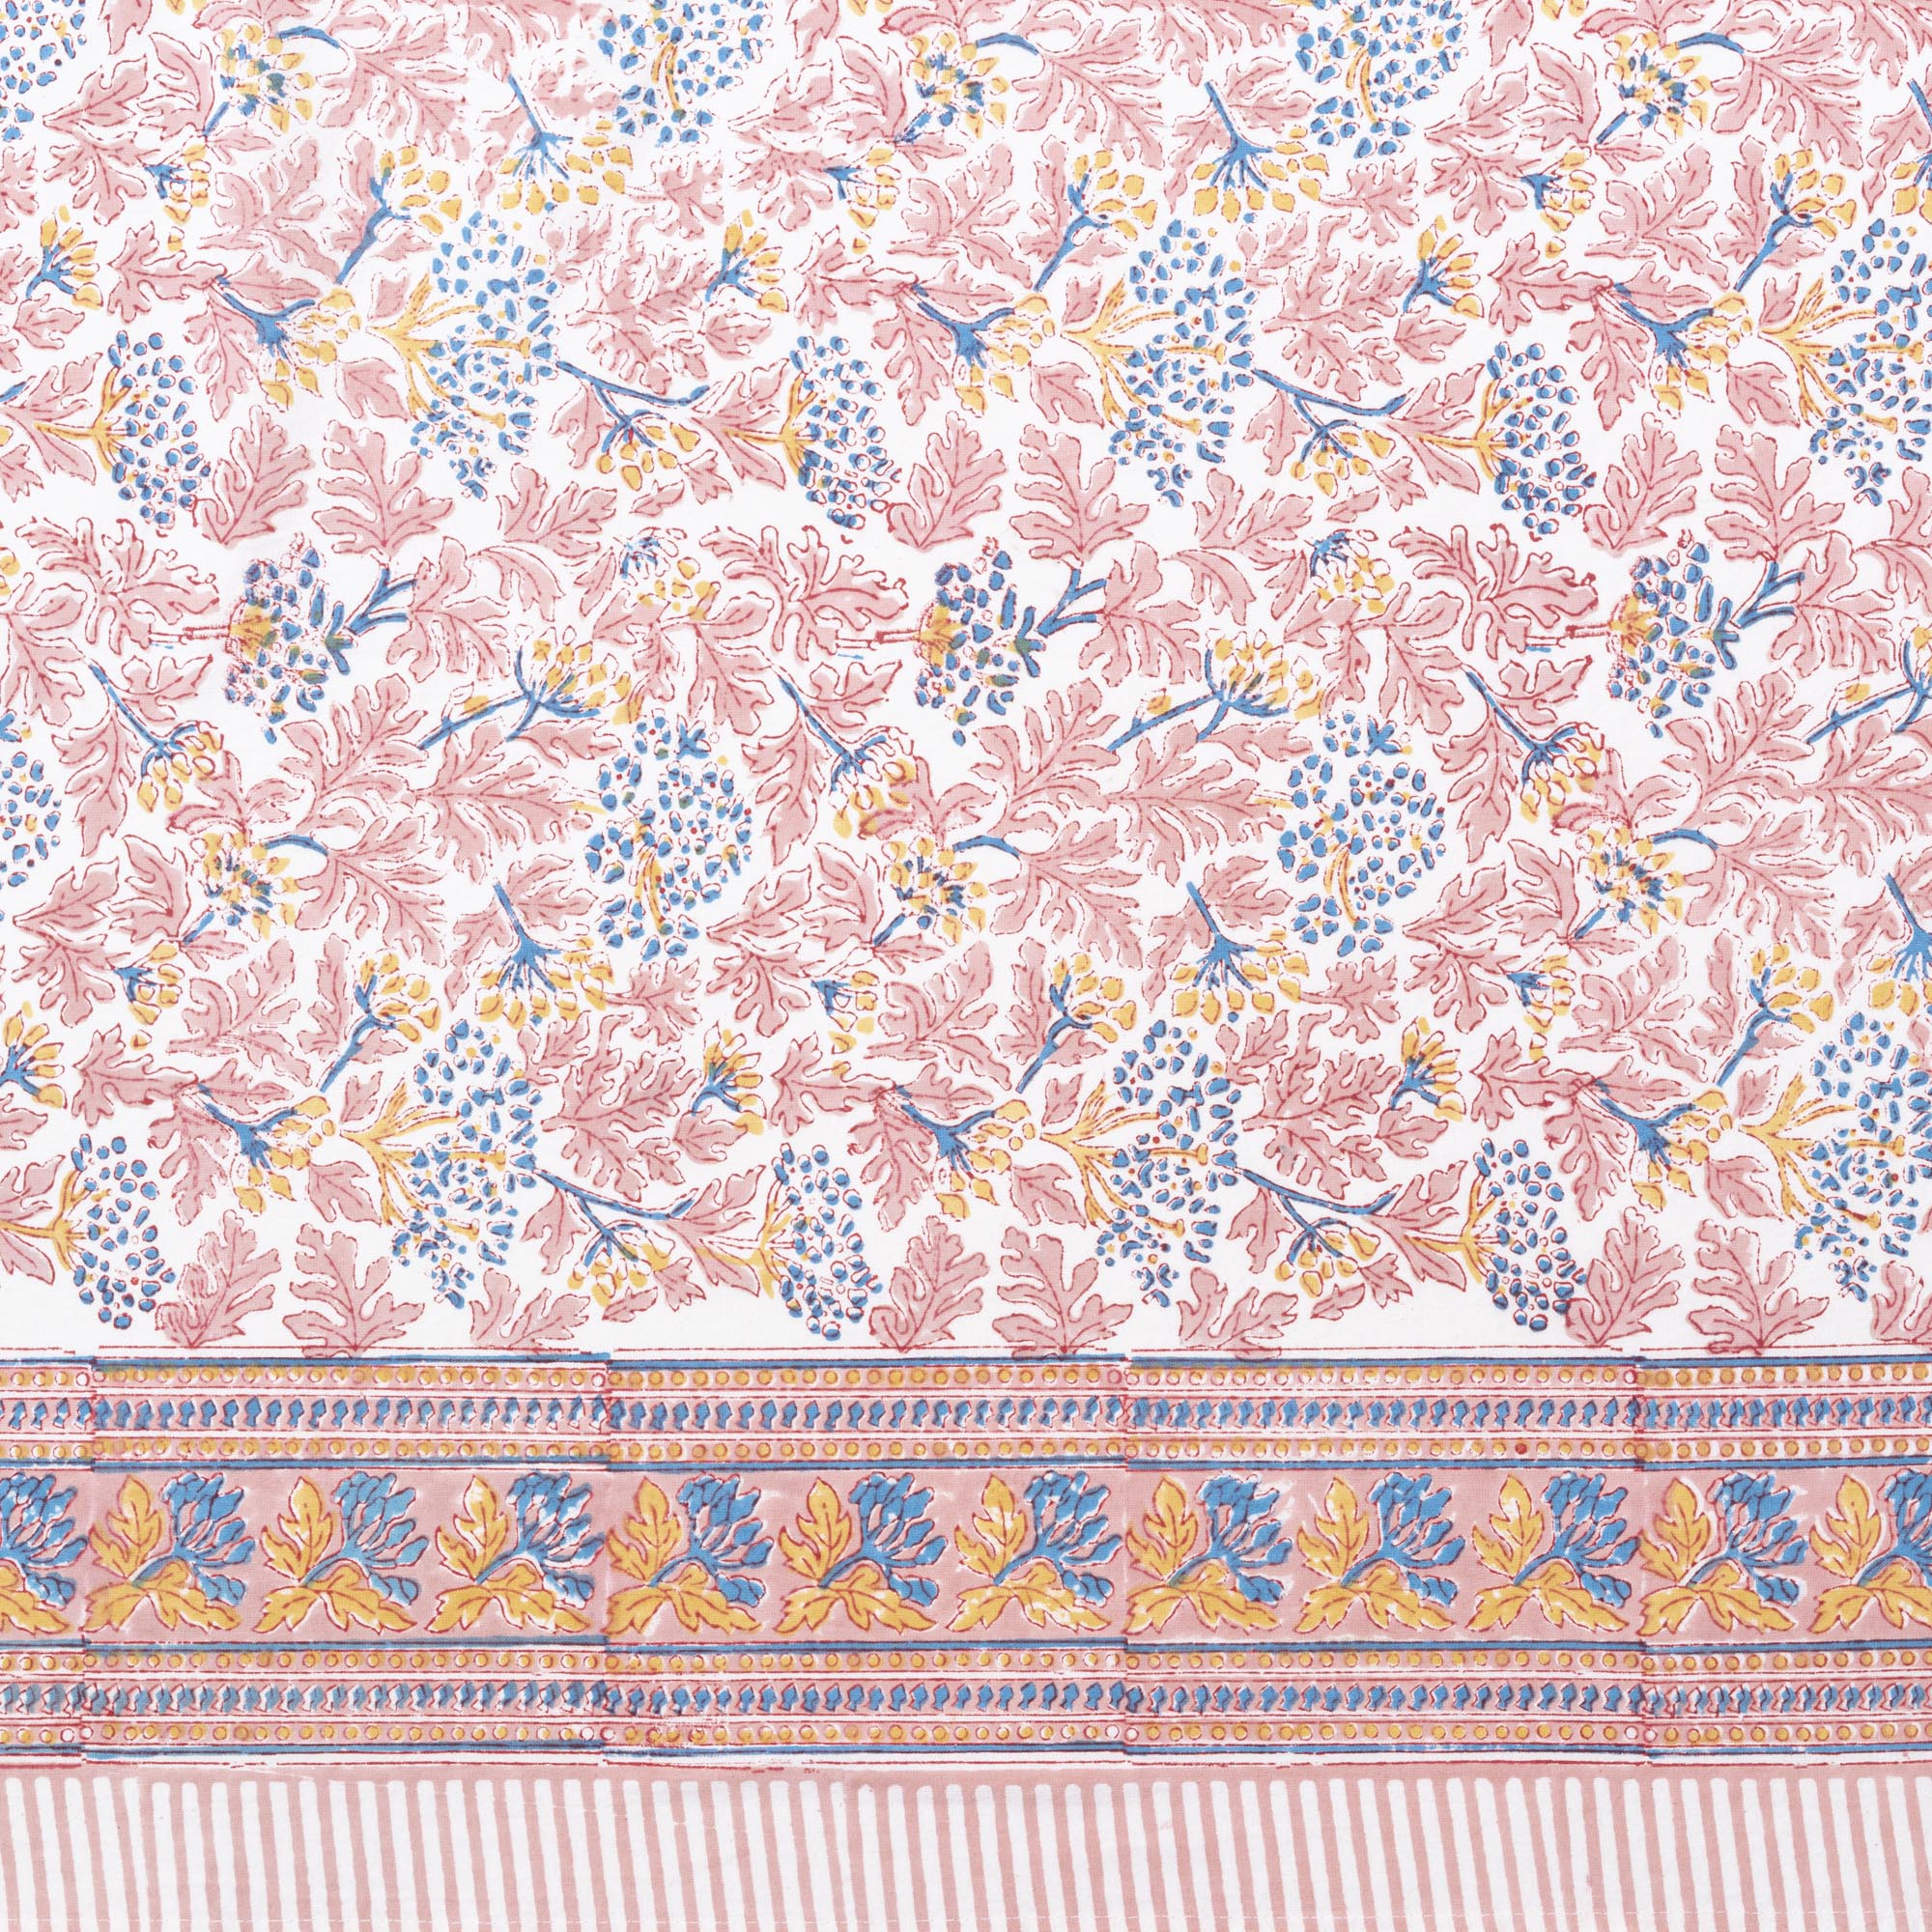 KELPIE TABLECLOTH IN PINK-BLUE